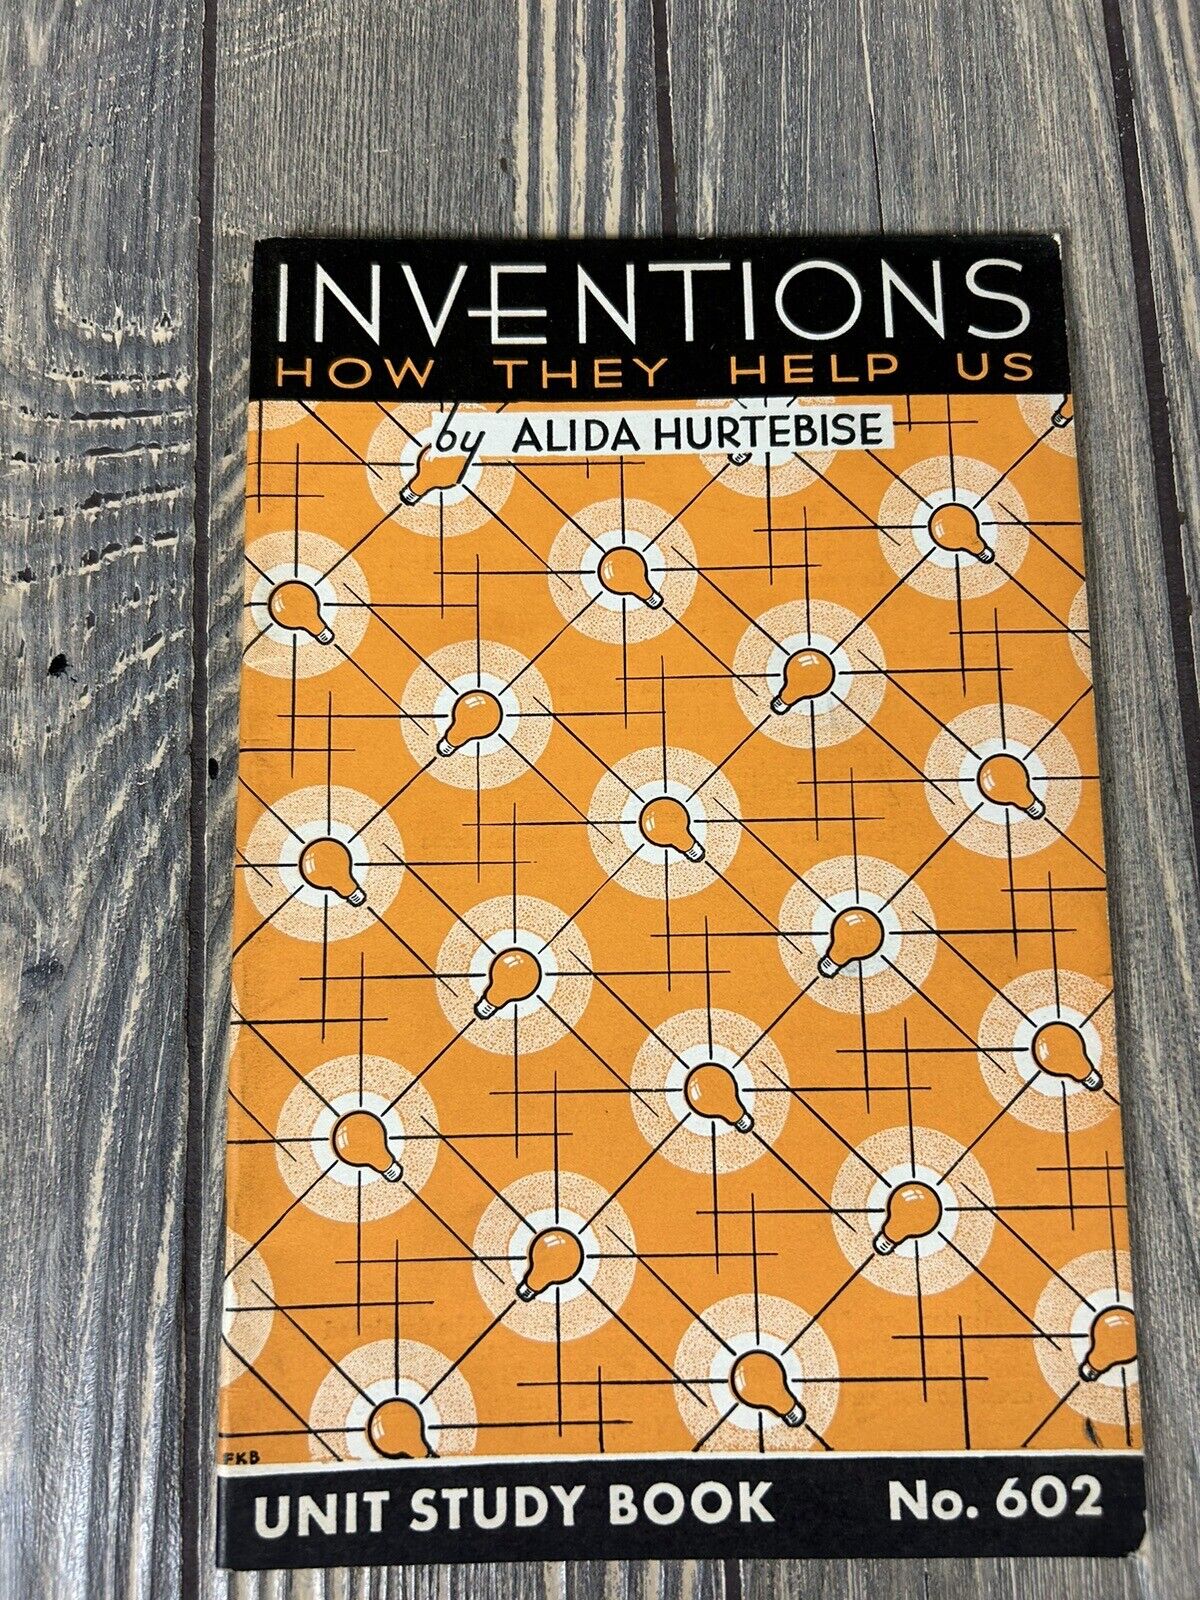 Vintage 1935 Inventions How They Help Us Unit Study Book 602 By Alida Hurtebise 